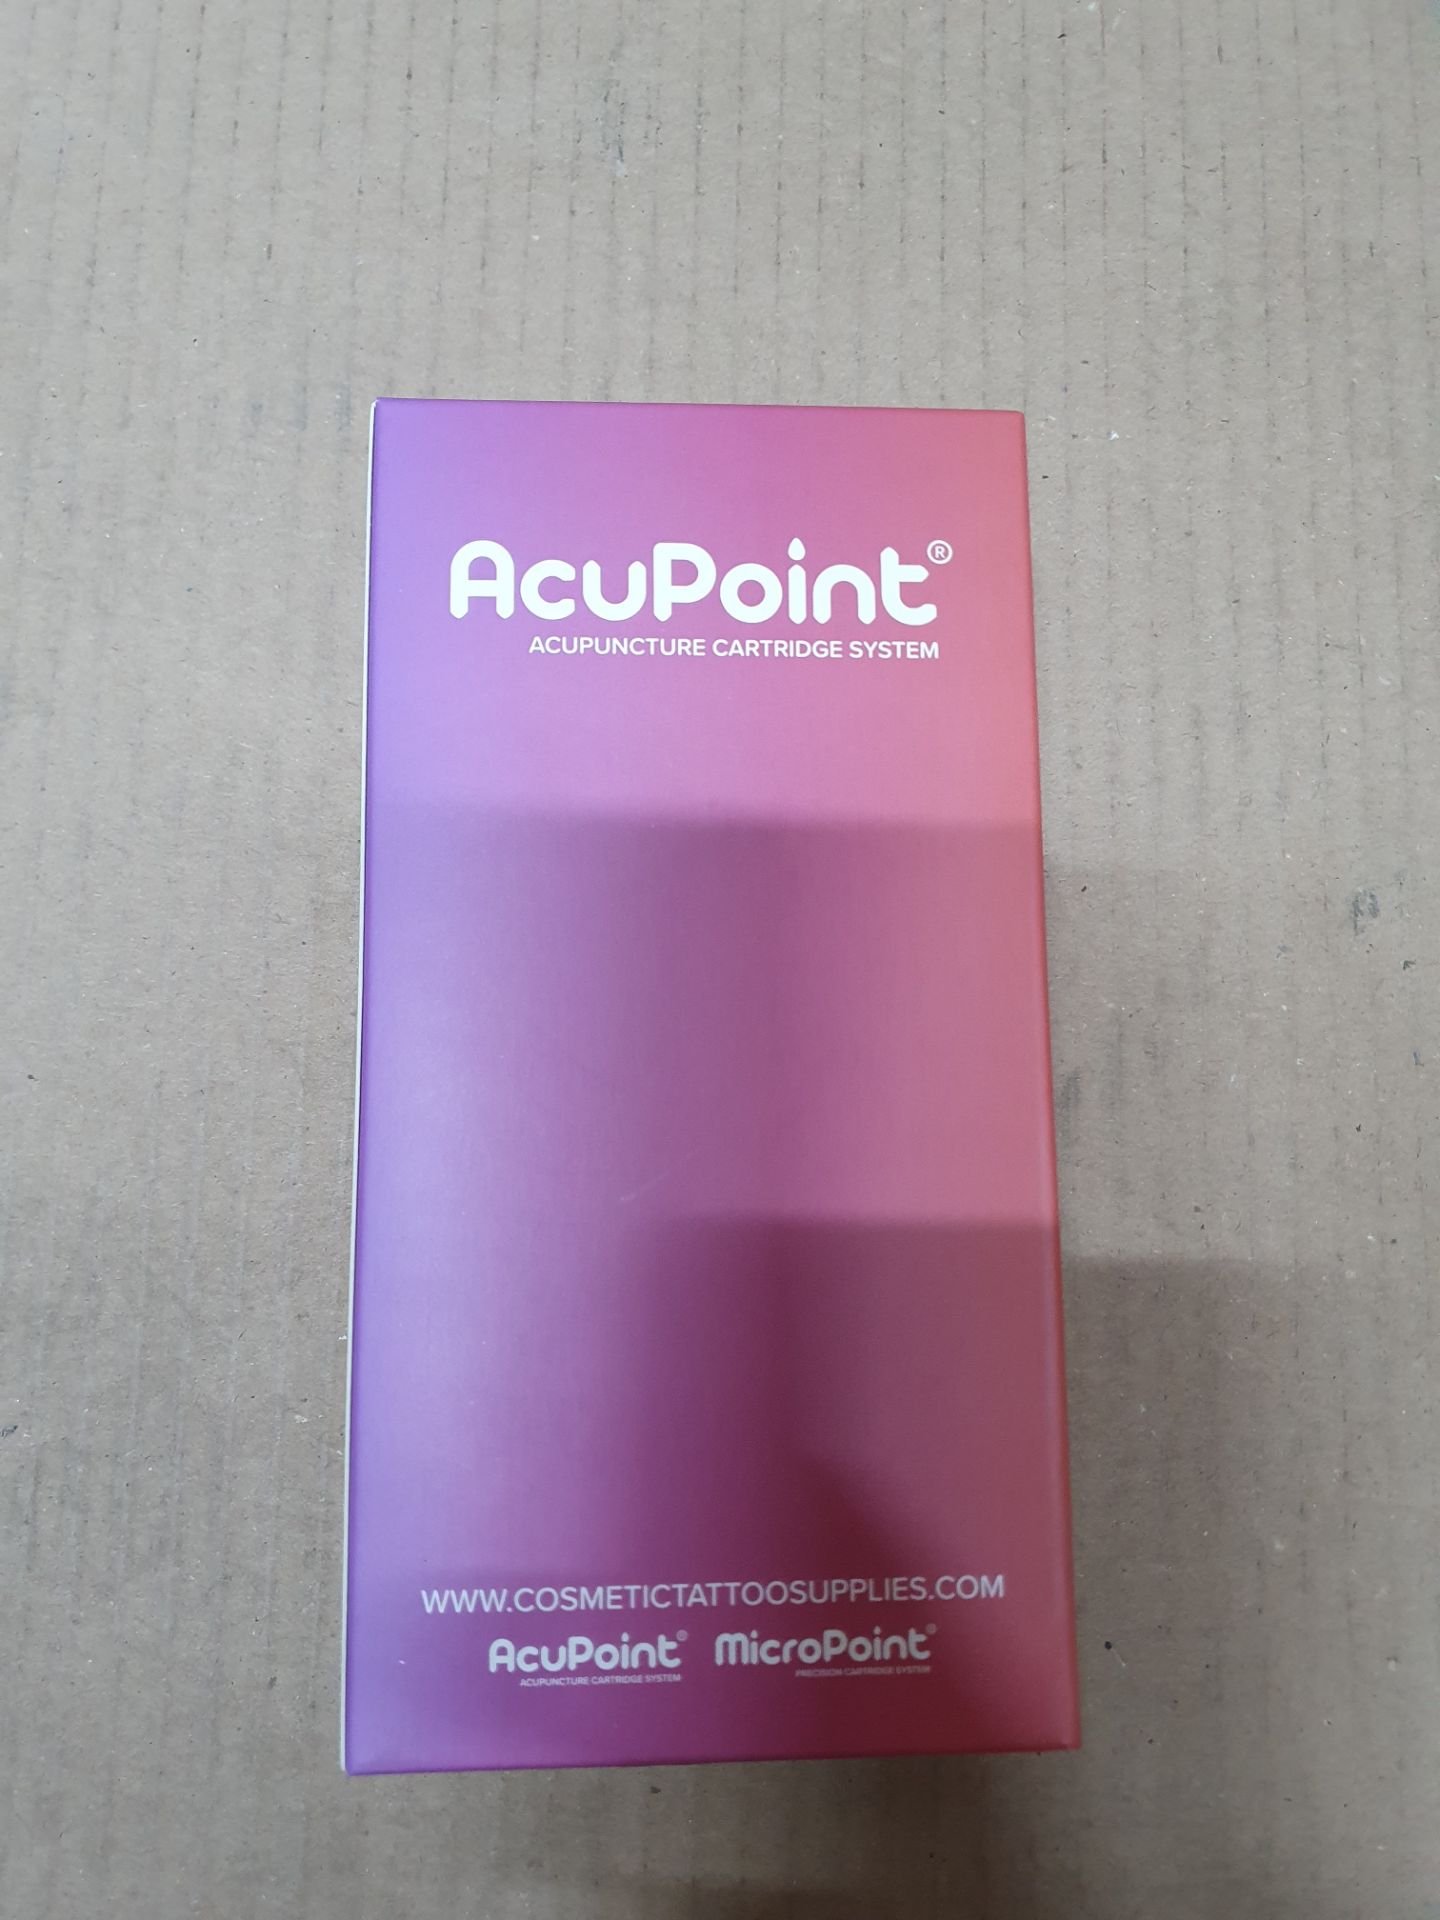 1,000 AcuPoint Accupuncture Cartridge System, Whip Shader exp 03&06/26 - Image 5 of 7